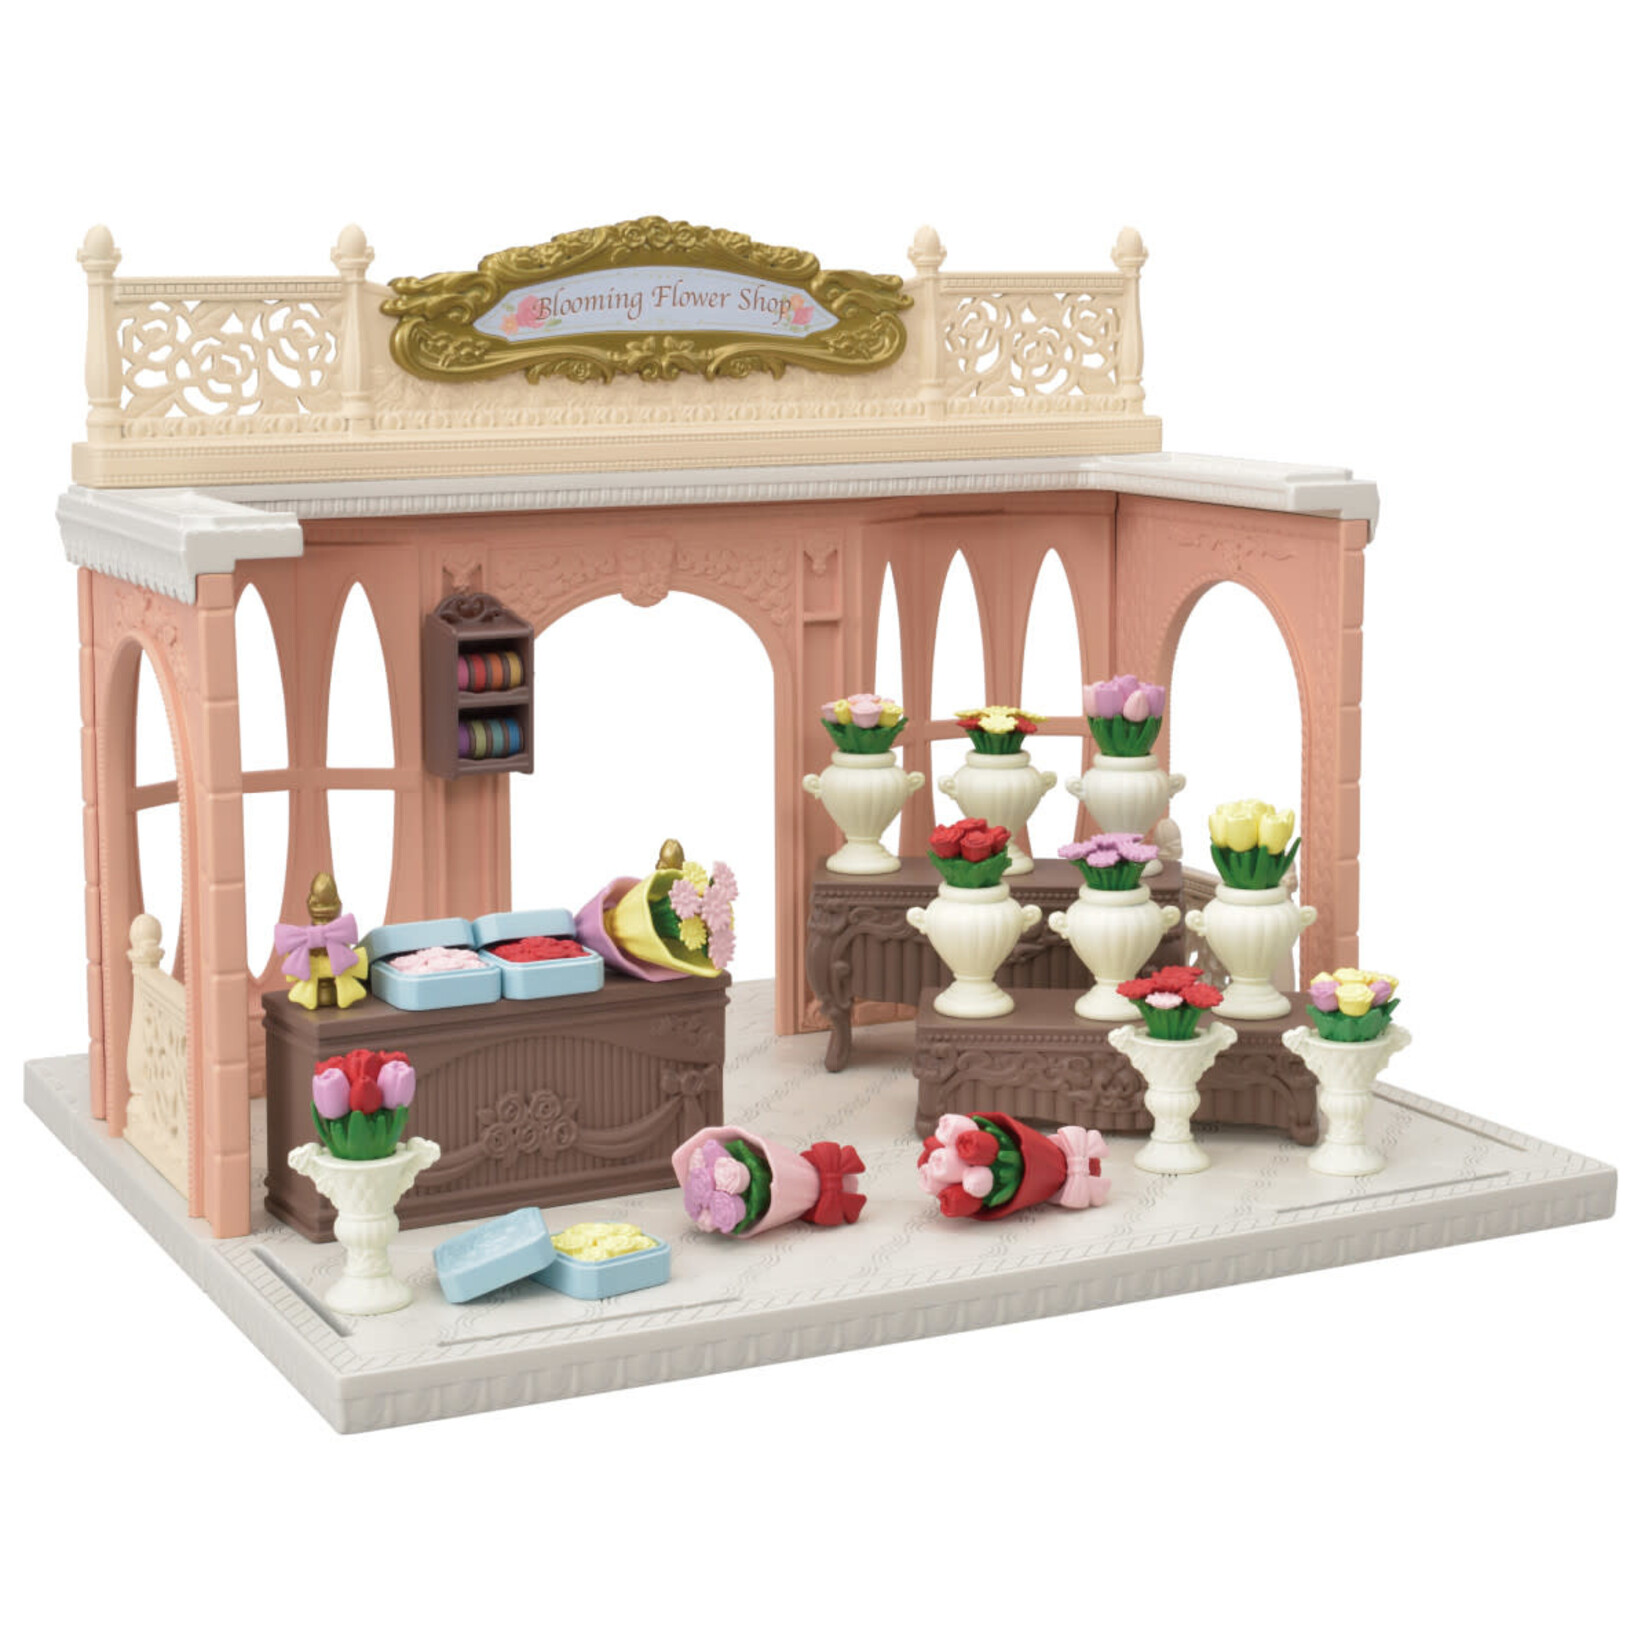 Calico Critters Calico Critters Blooming Flower Shop Set